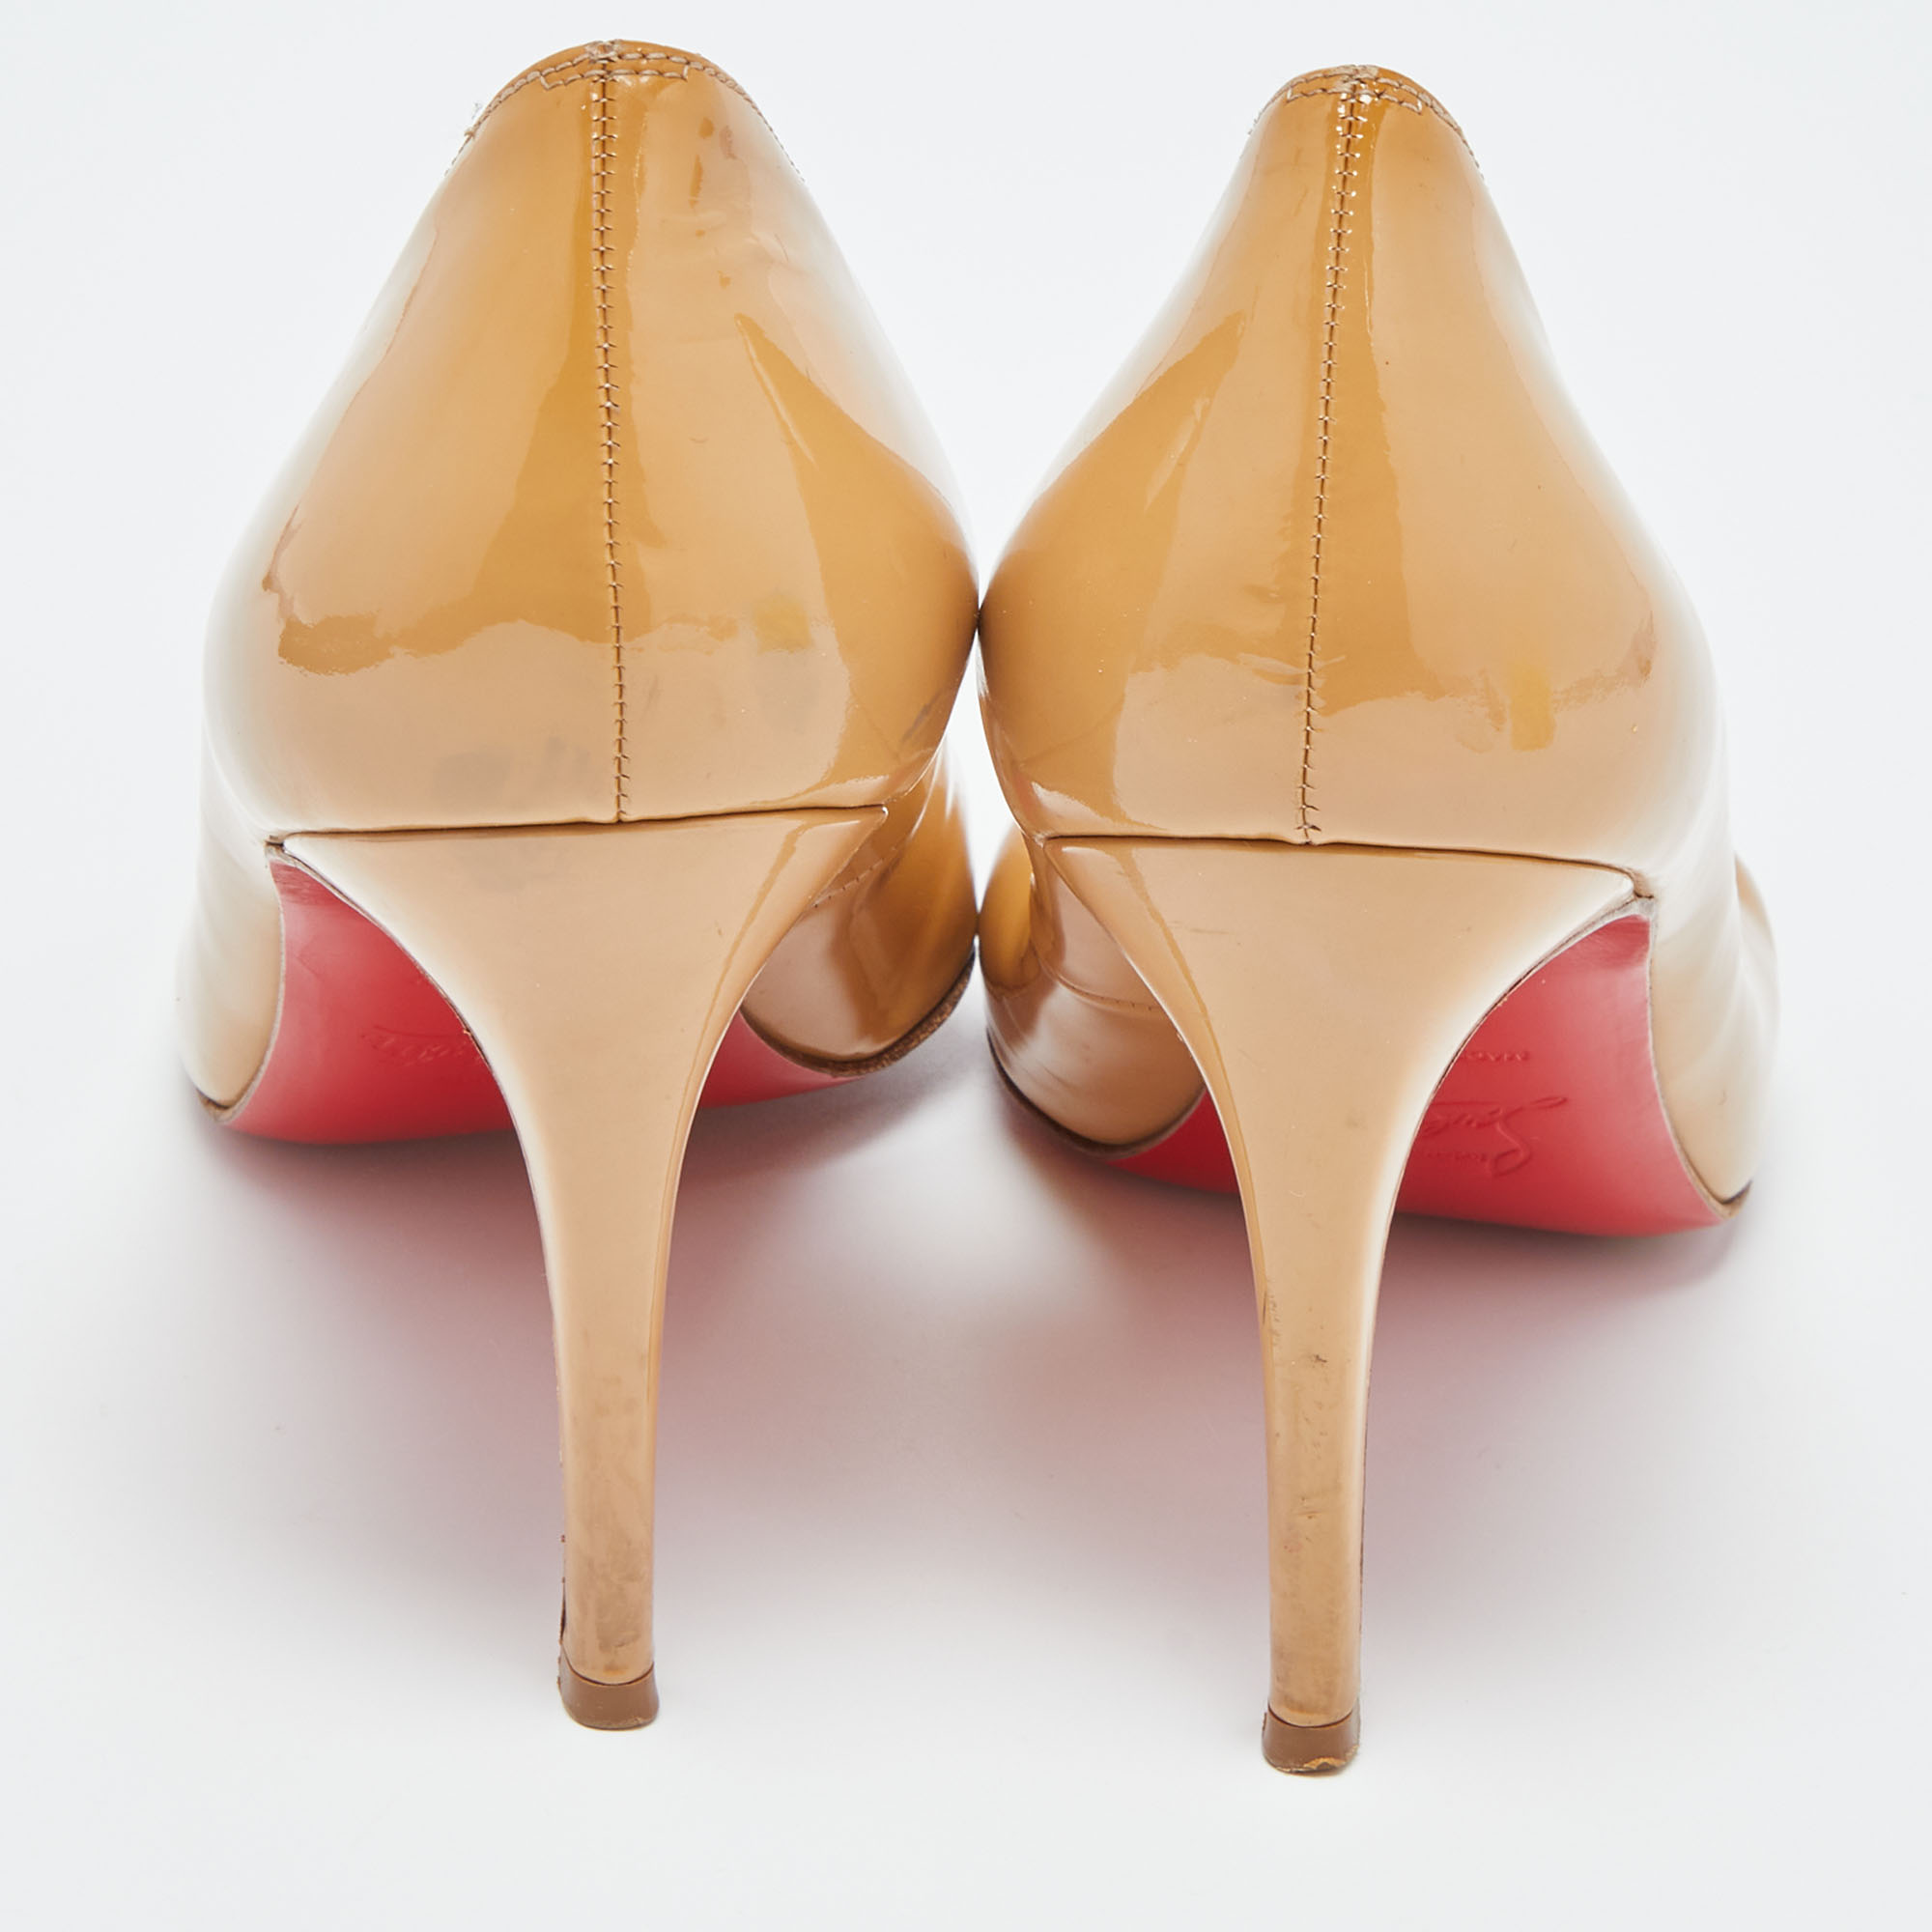 Christian Louboutin Beige Patent Leather Simple Pumps Size 39.5